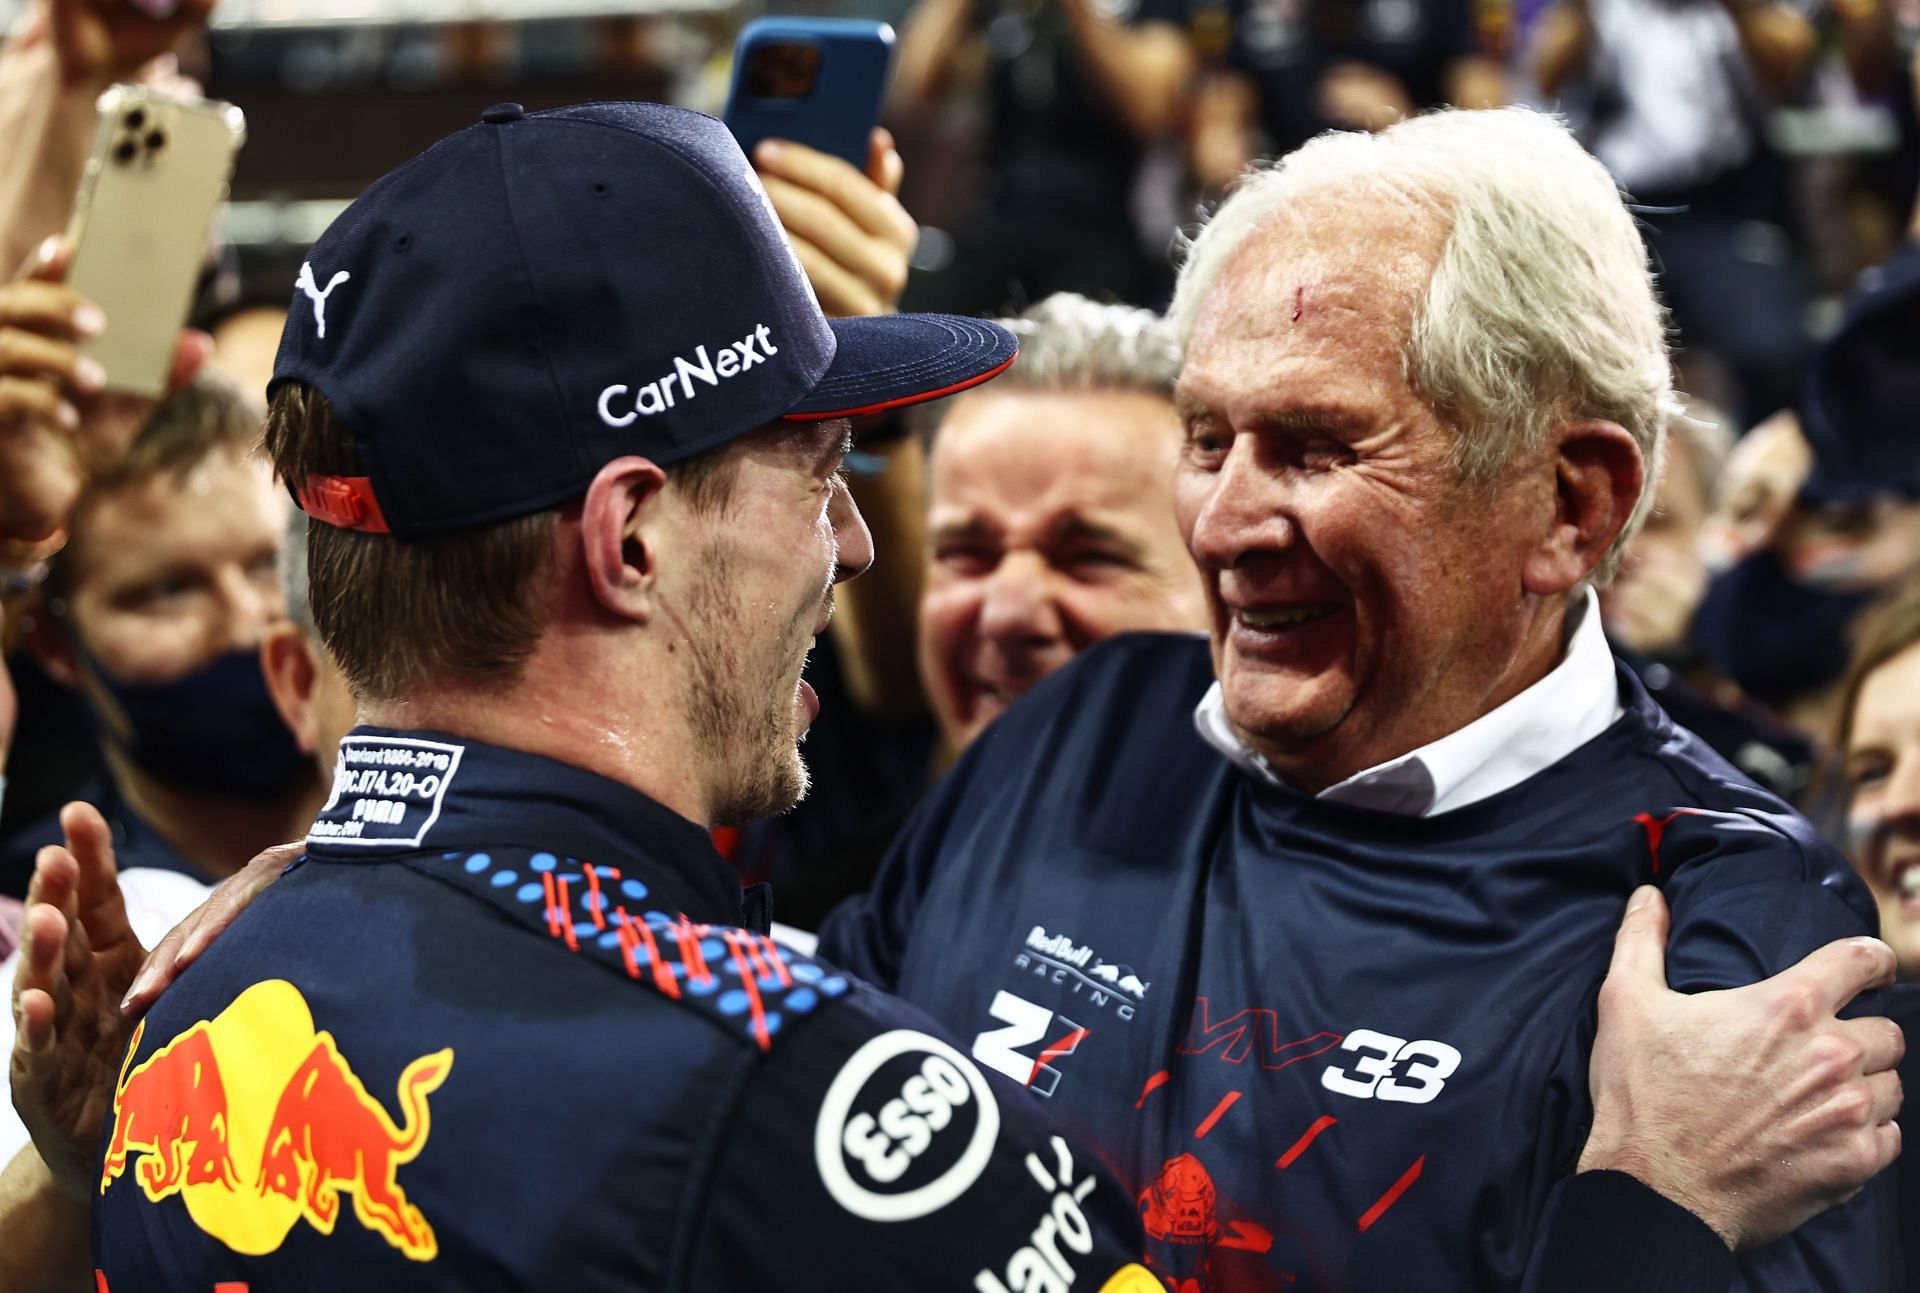 Max Verstappen (left) and Dr. Helmut Marko (right) celebrate after the 2021 Abu Dhabi Grand Prix (Photo by Mark Thompson/Getty Images)